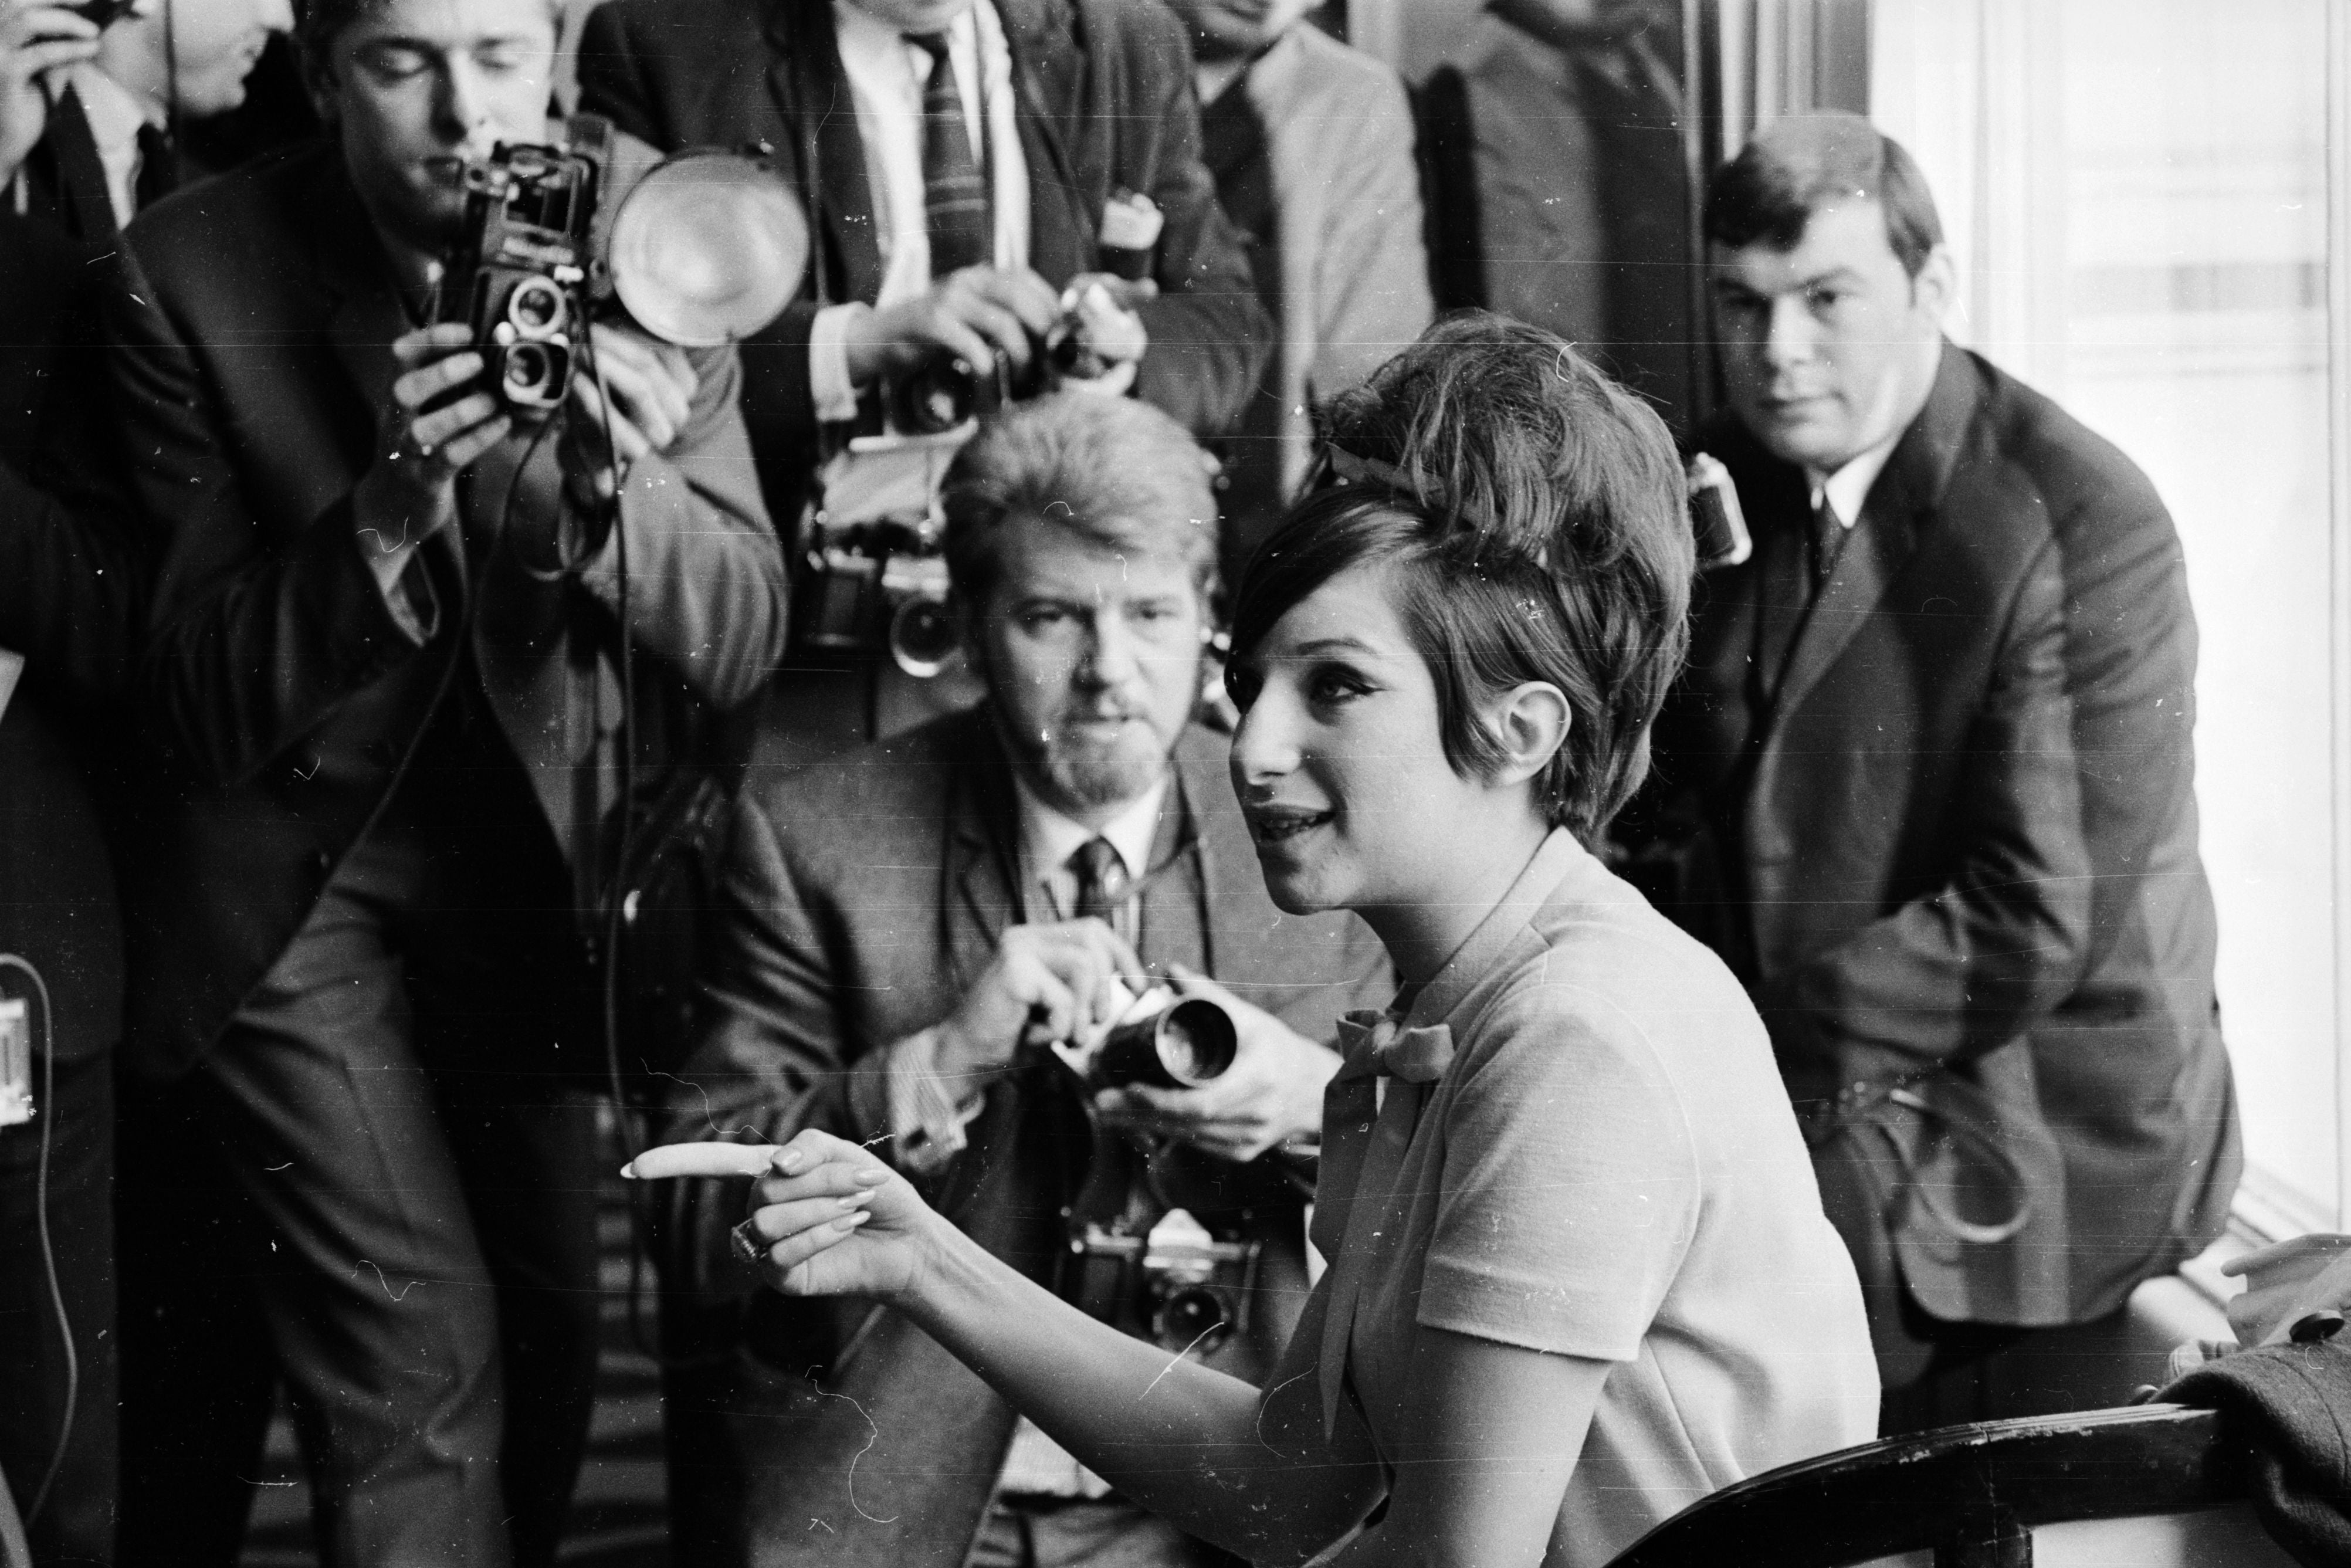 Streisand surrounded by press photographers in 1965